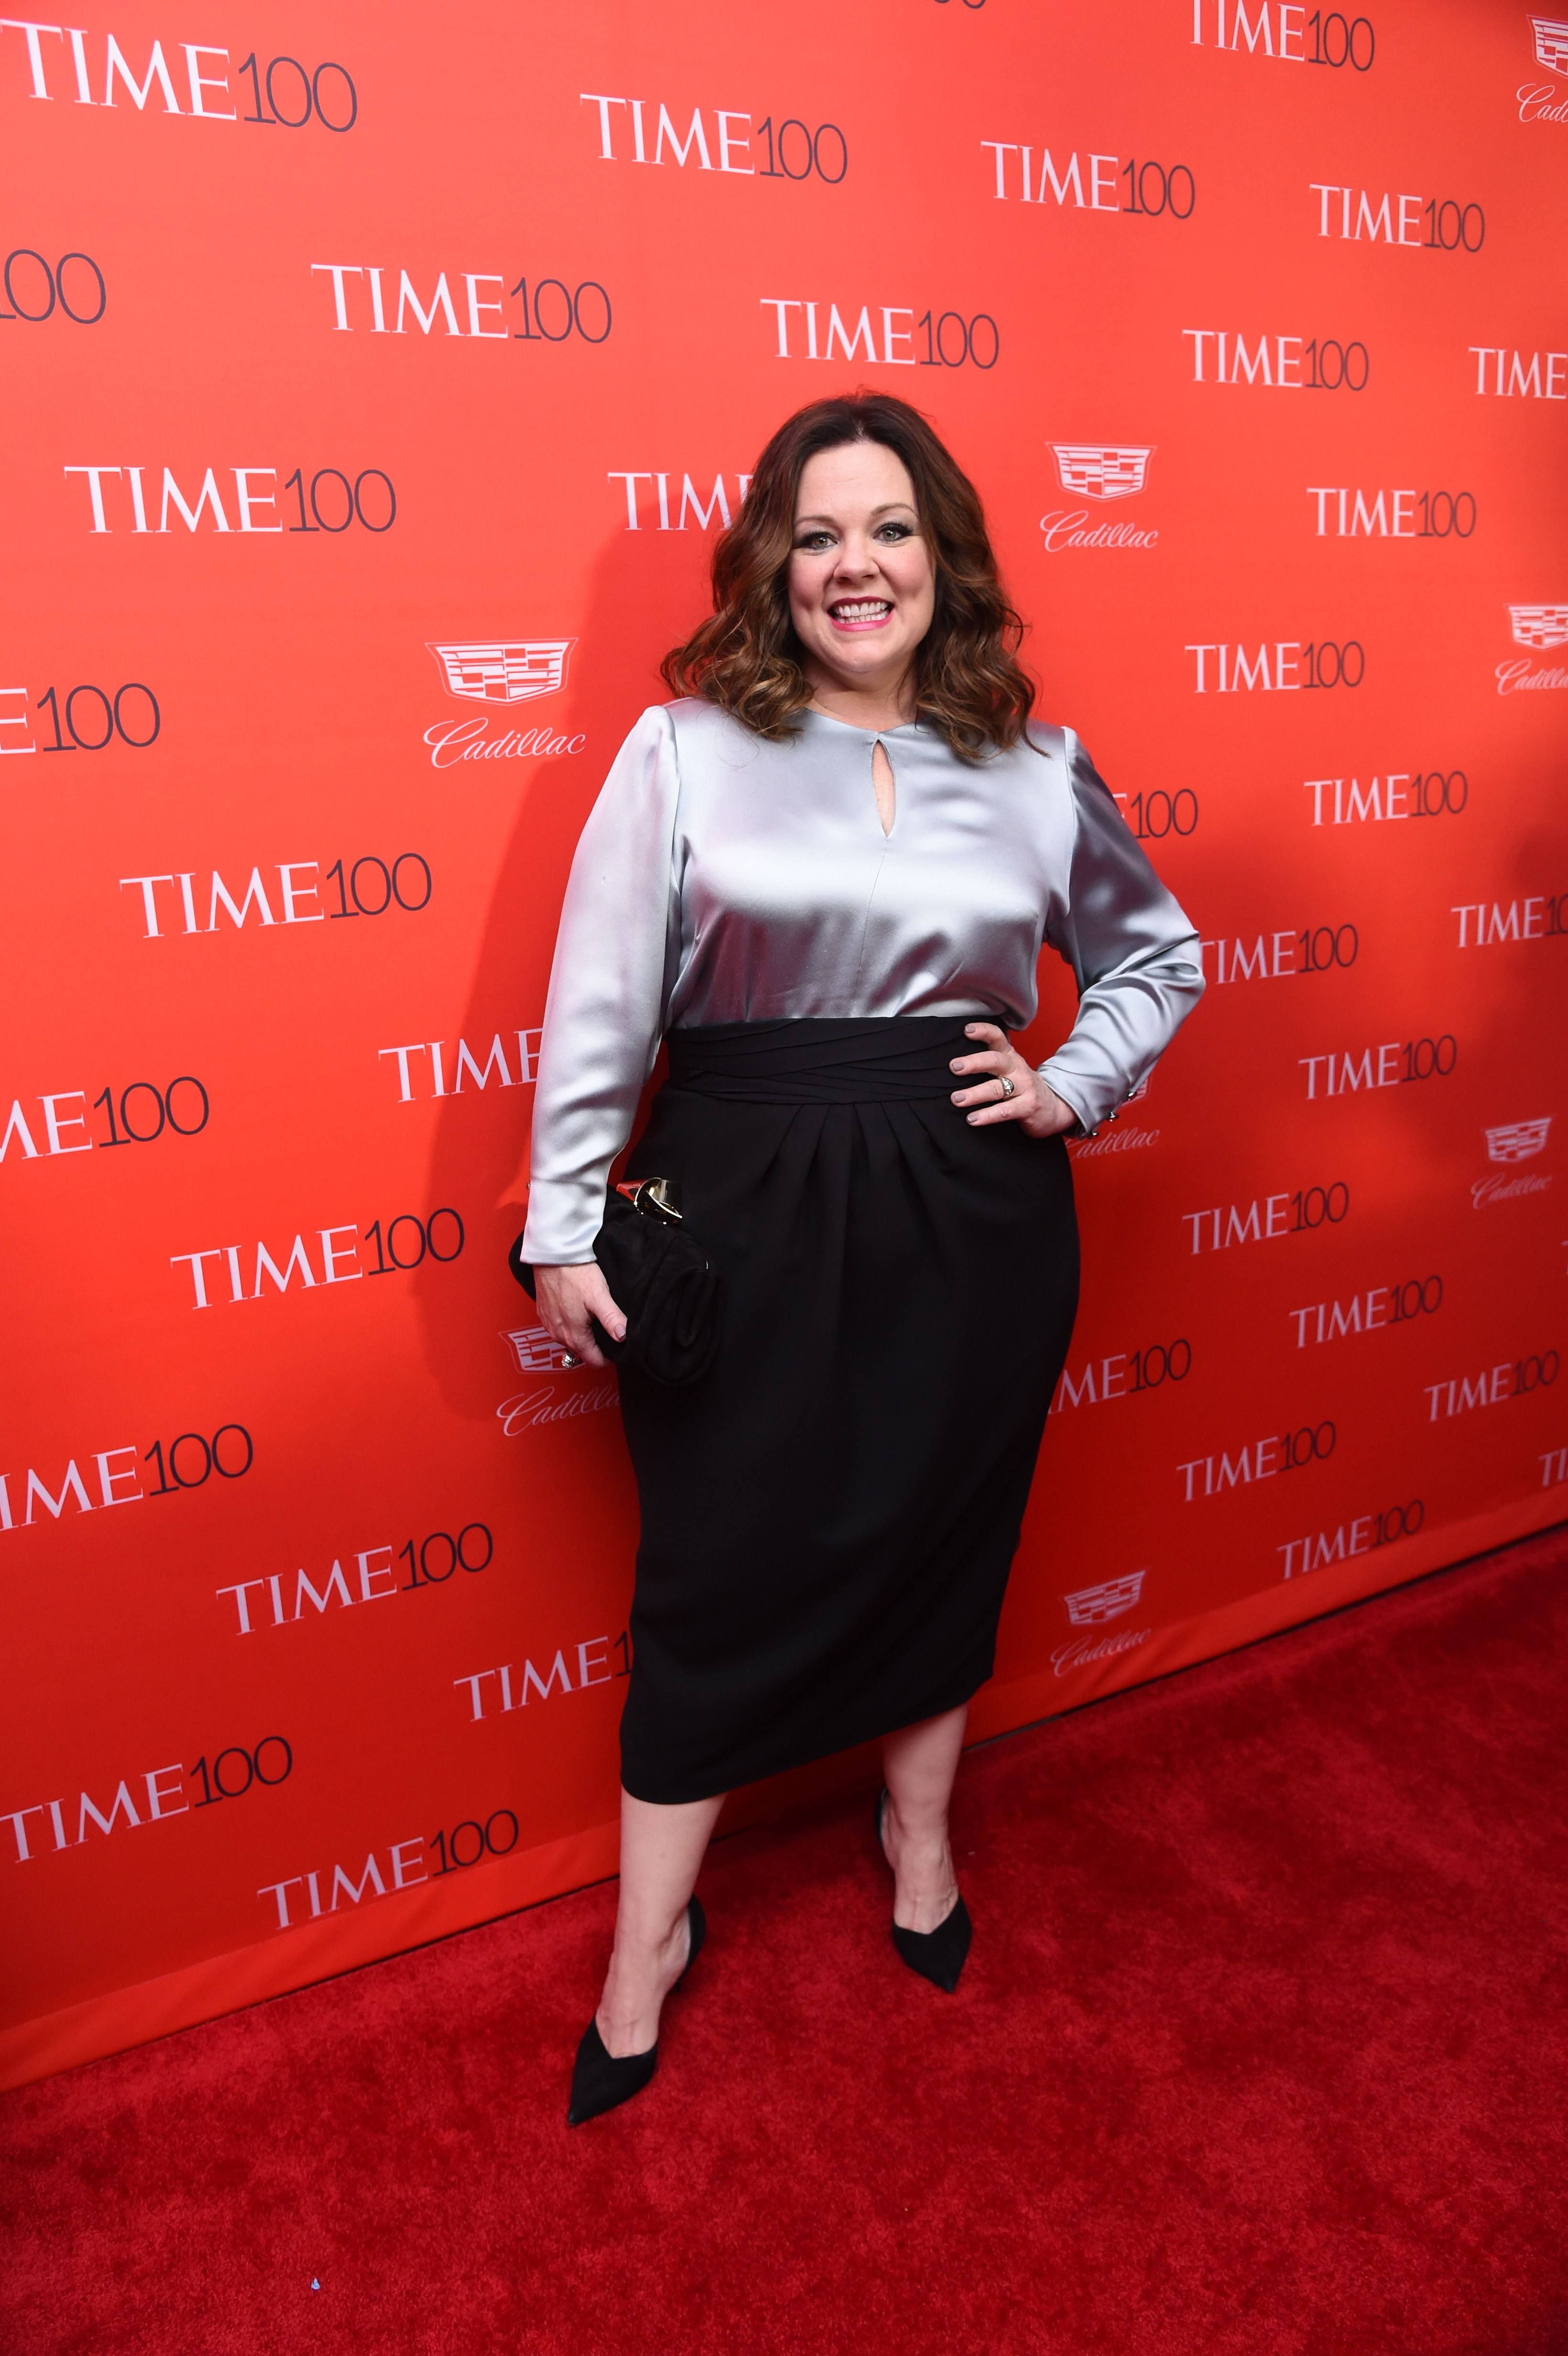 Melissa McCarthy at the TIME 100 gala in New York on April 26, 2016.